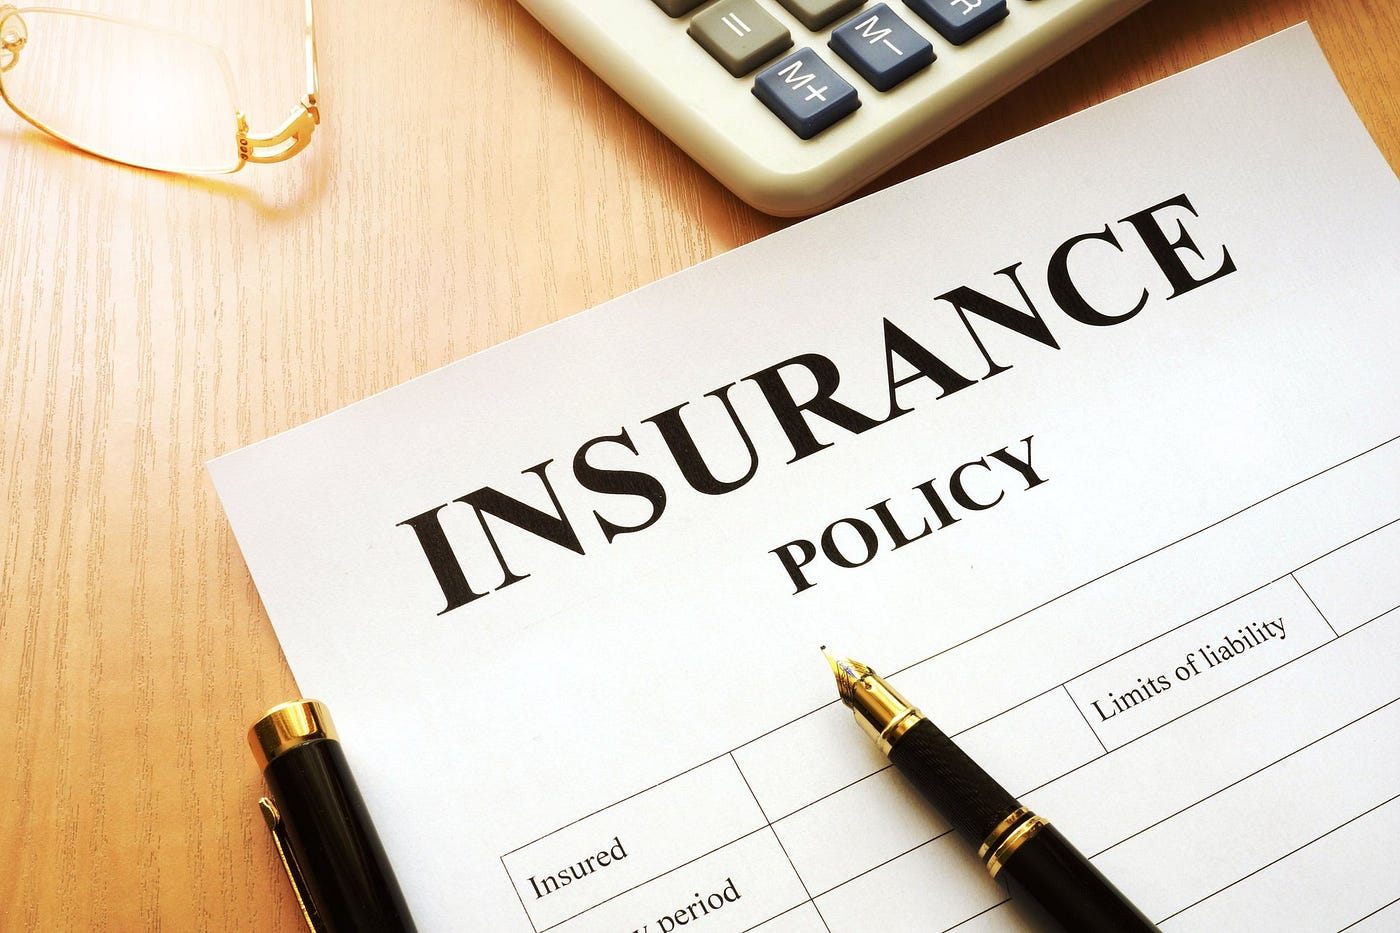 What Happens If You Lie On A Life Insurance Application?